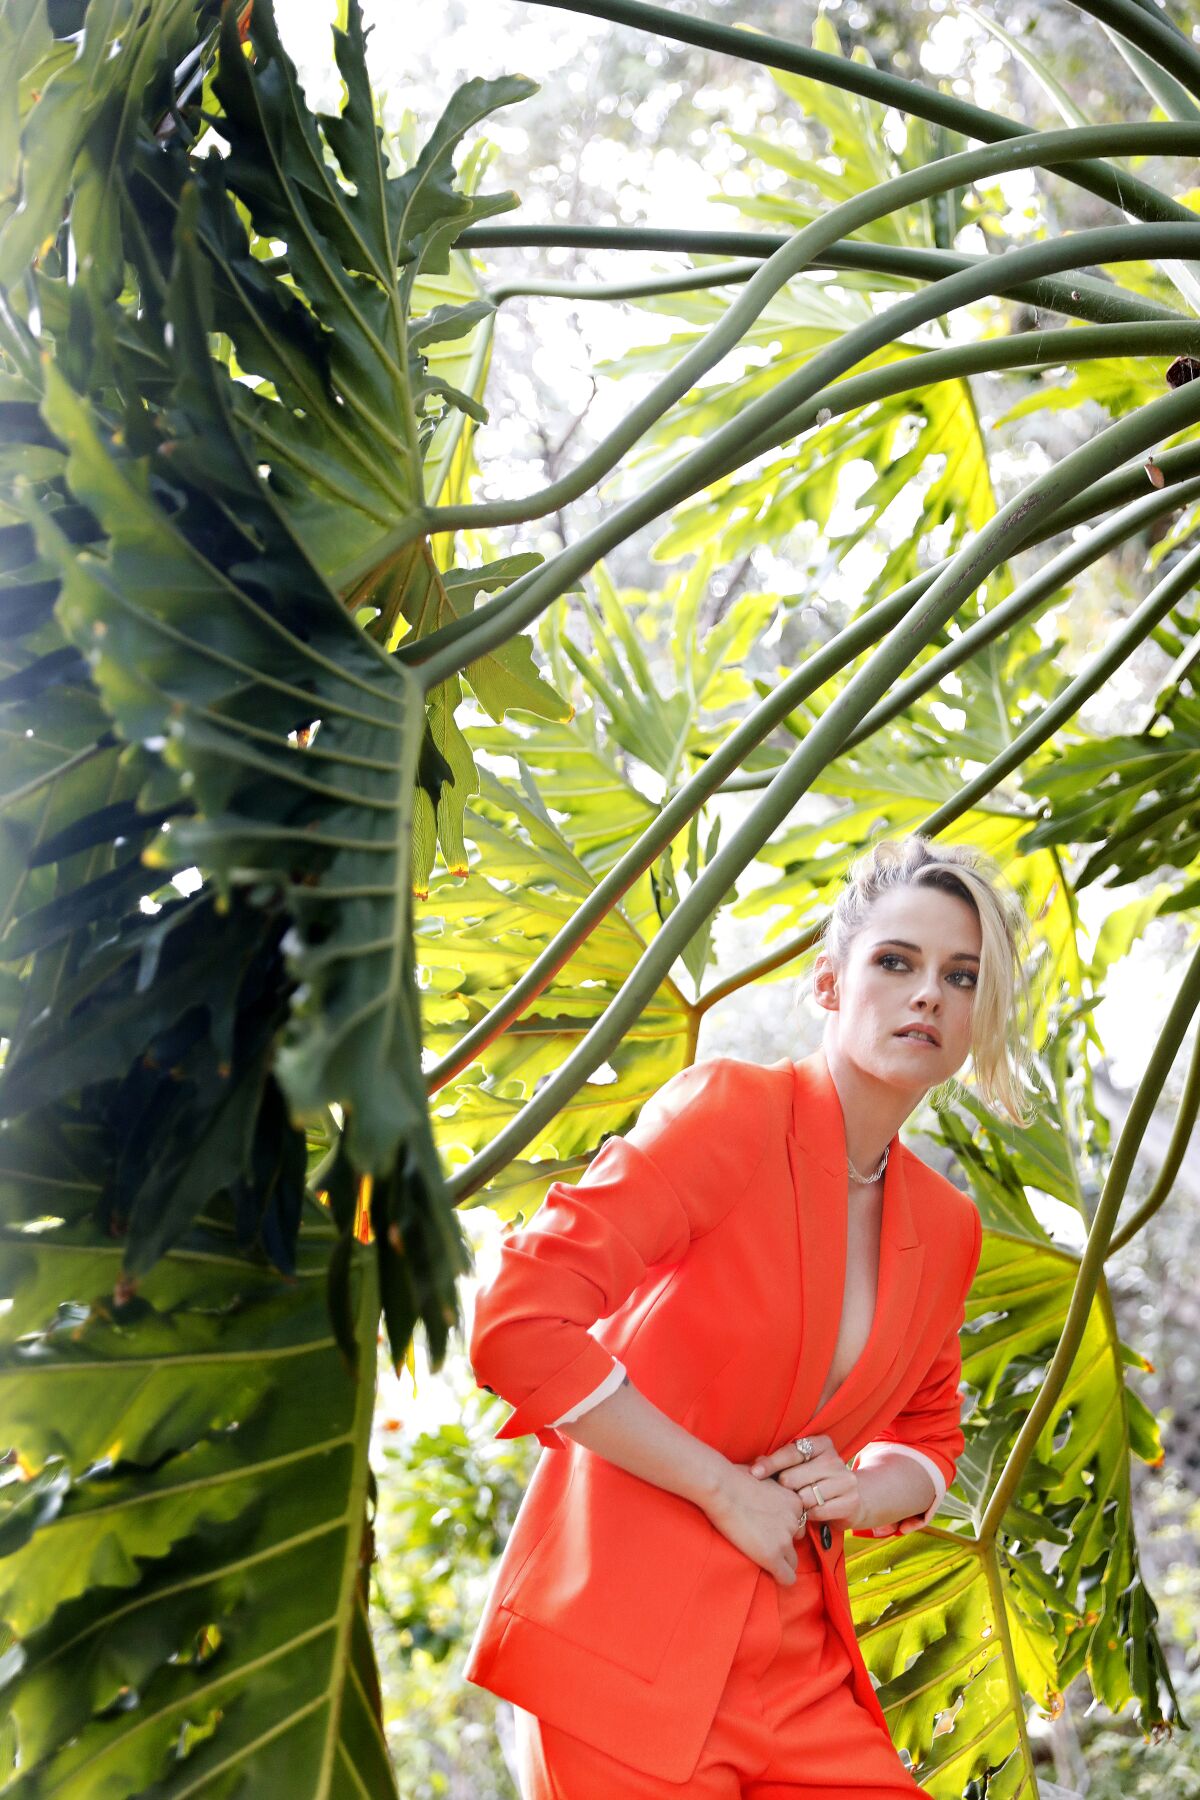 Kristen Stewart poses for a portrait surrounded by palm fronds.